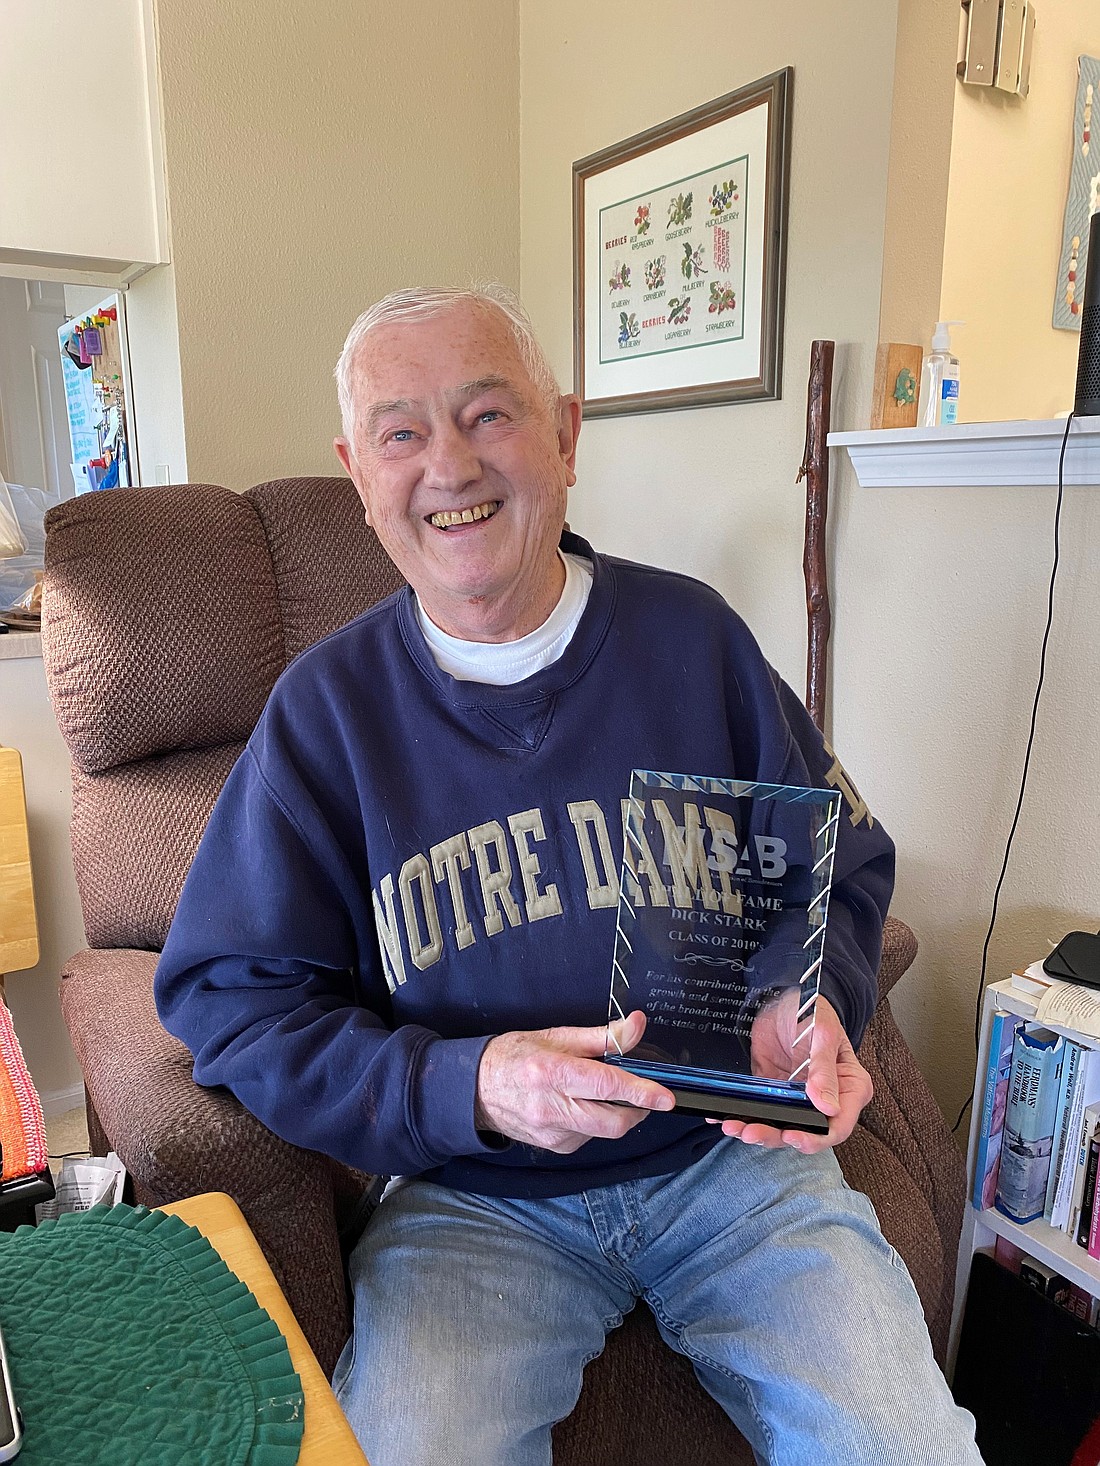 Dick Stark received his Washington State Association of Broadcasters Hall of Fame Award at his home in Bellingham on May 10. The longtime radio broadcaster and Whatcom County youth advocate passed away Tuesday, July 19 and will be celebrated Thursday, Aug. 4 at Cordata Presbyterian Church.